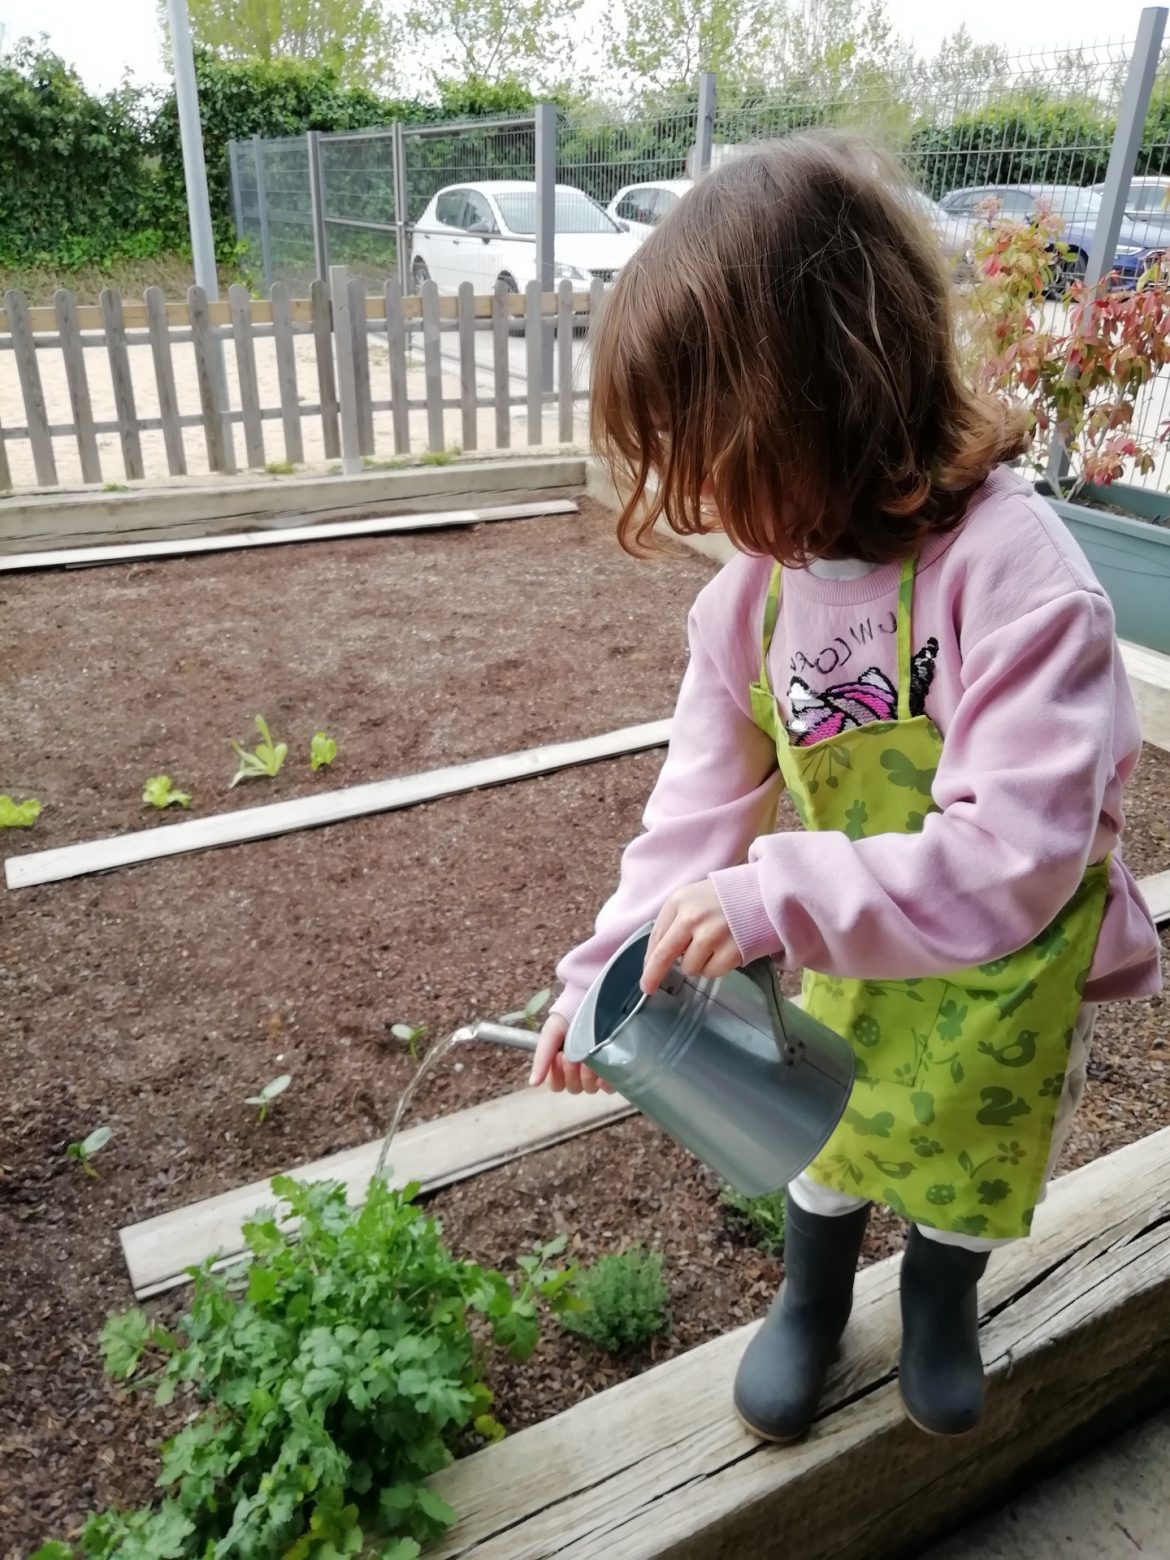 GARDENING TEACHES CHILDREN THE RESPONSIBILITY OF PRESERVING THE ENVIRONMENT